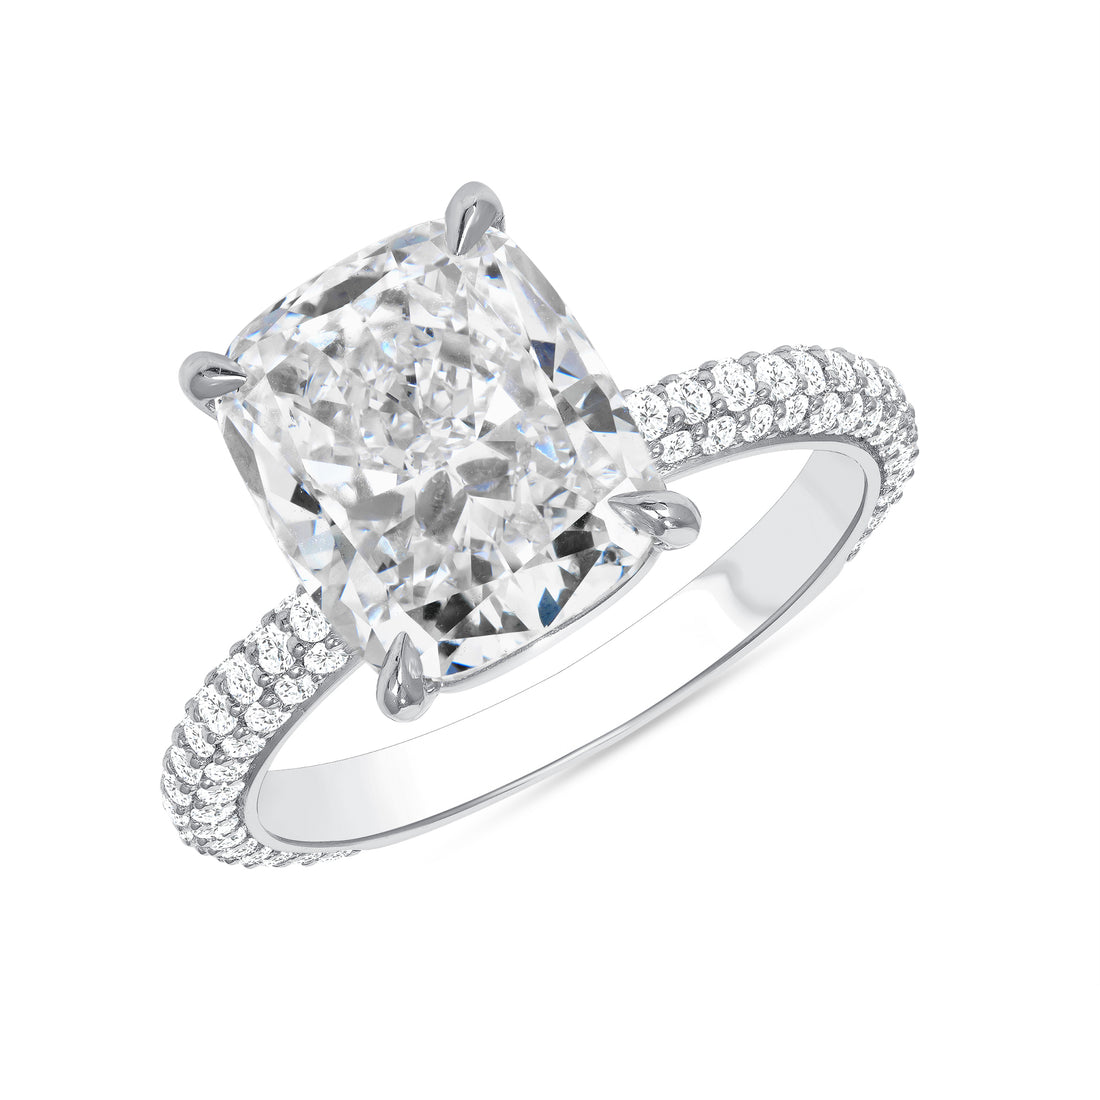 4CT Cushion Cut Diamond Ring with Pave Shank